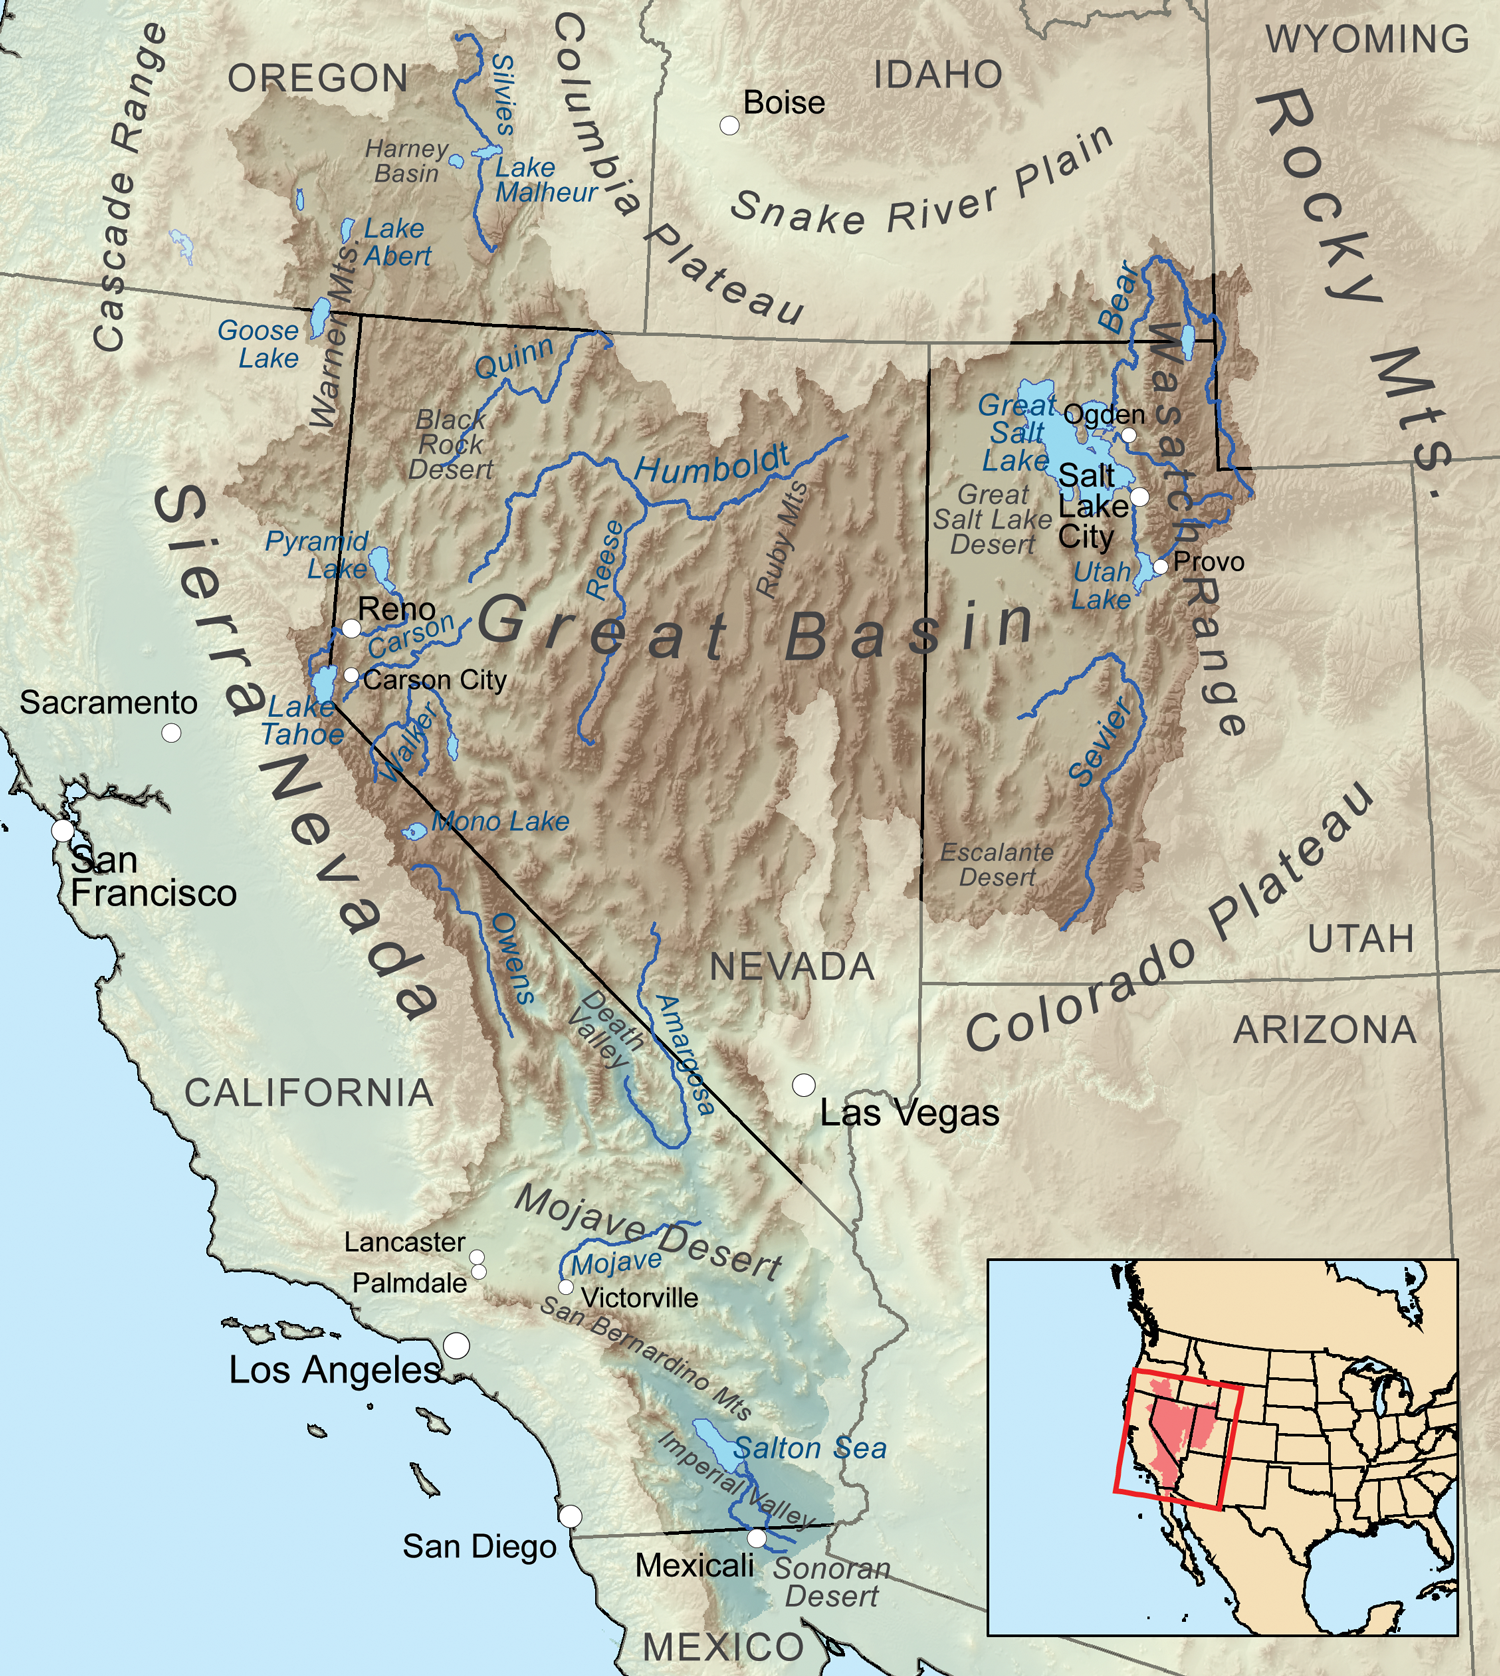 Map of the Great Basin occupying Utah west of the Wasatch Mountains, most of Neada, southeast Oregon and esxtending into southern California.